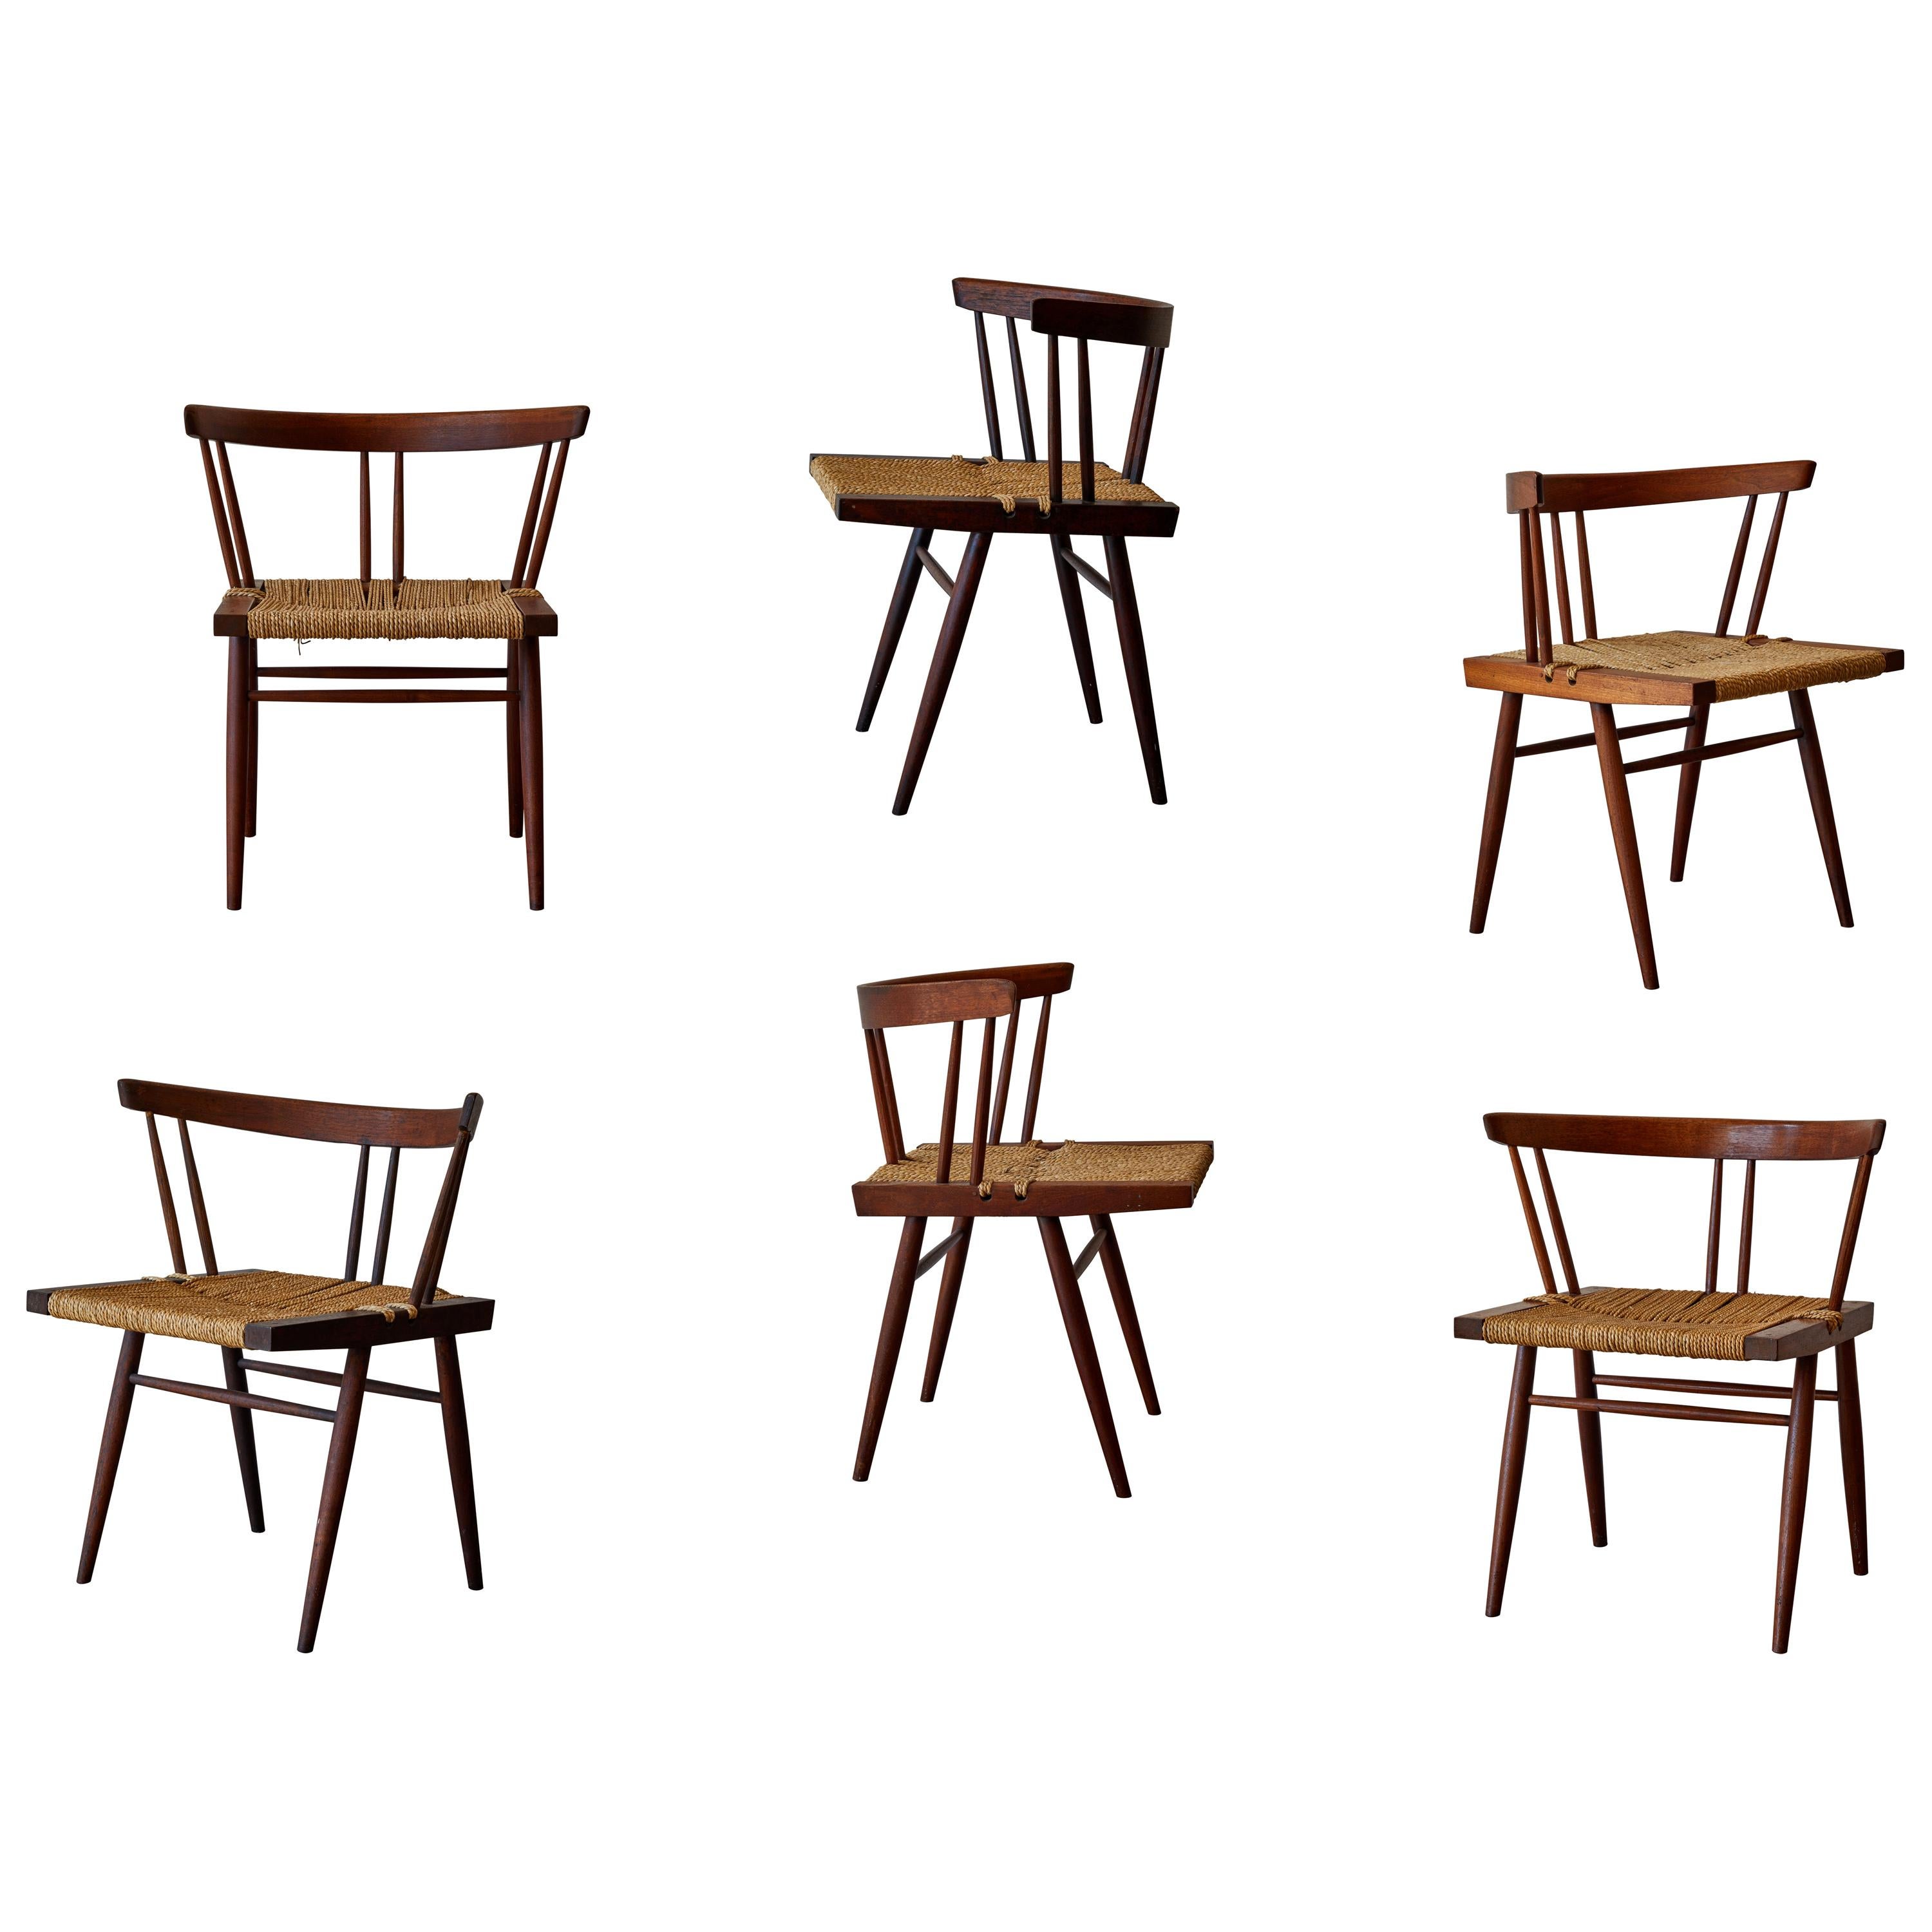 Set of Six Grass Seated Chairs by George Nakashima